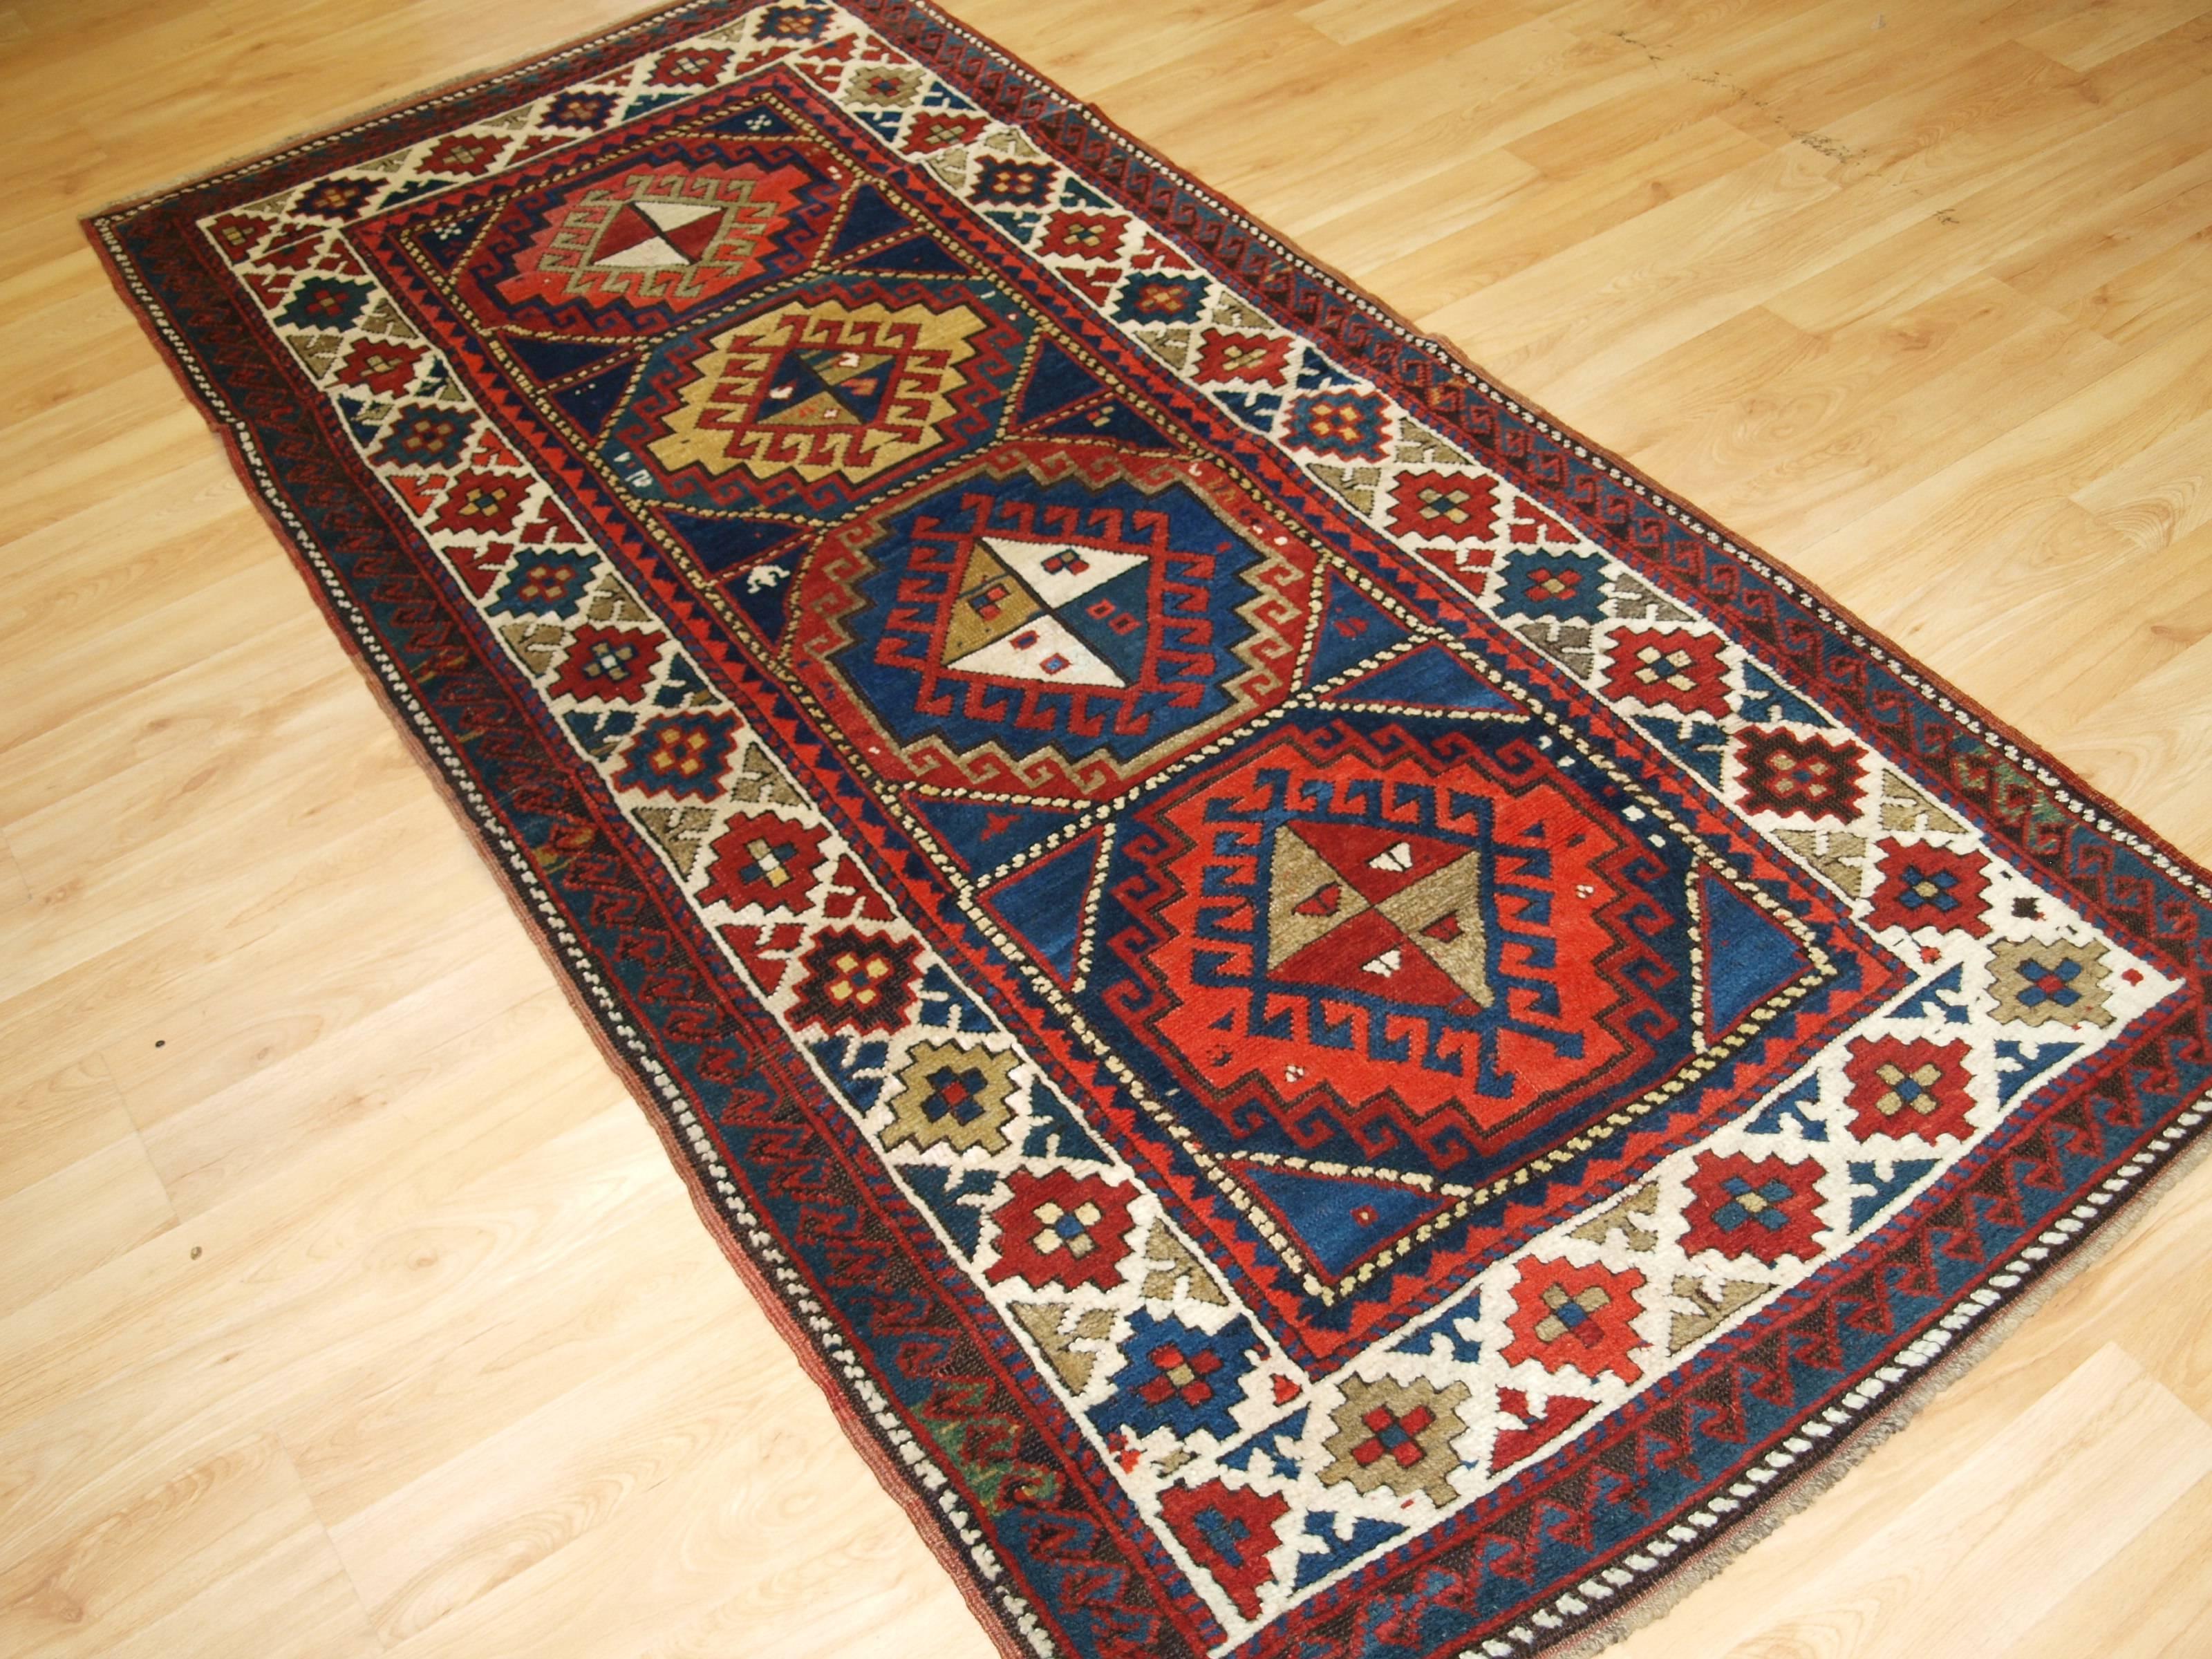 Antique Caucasian Kazak long rug, superb color and design, circa 1900.
Size: 7ft 3in x 3ft 6in (222 x 107cm).

Antique Caucasian Kazak long rug or short runner from the Western Caucasus. 

circa 1900.

A very good example of a Kazak runner or